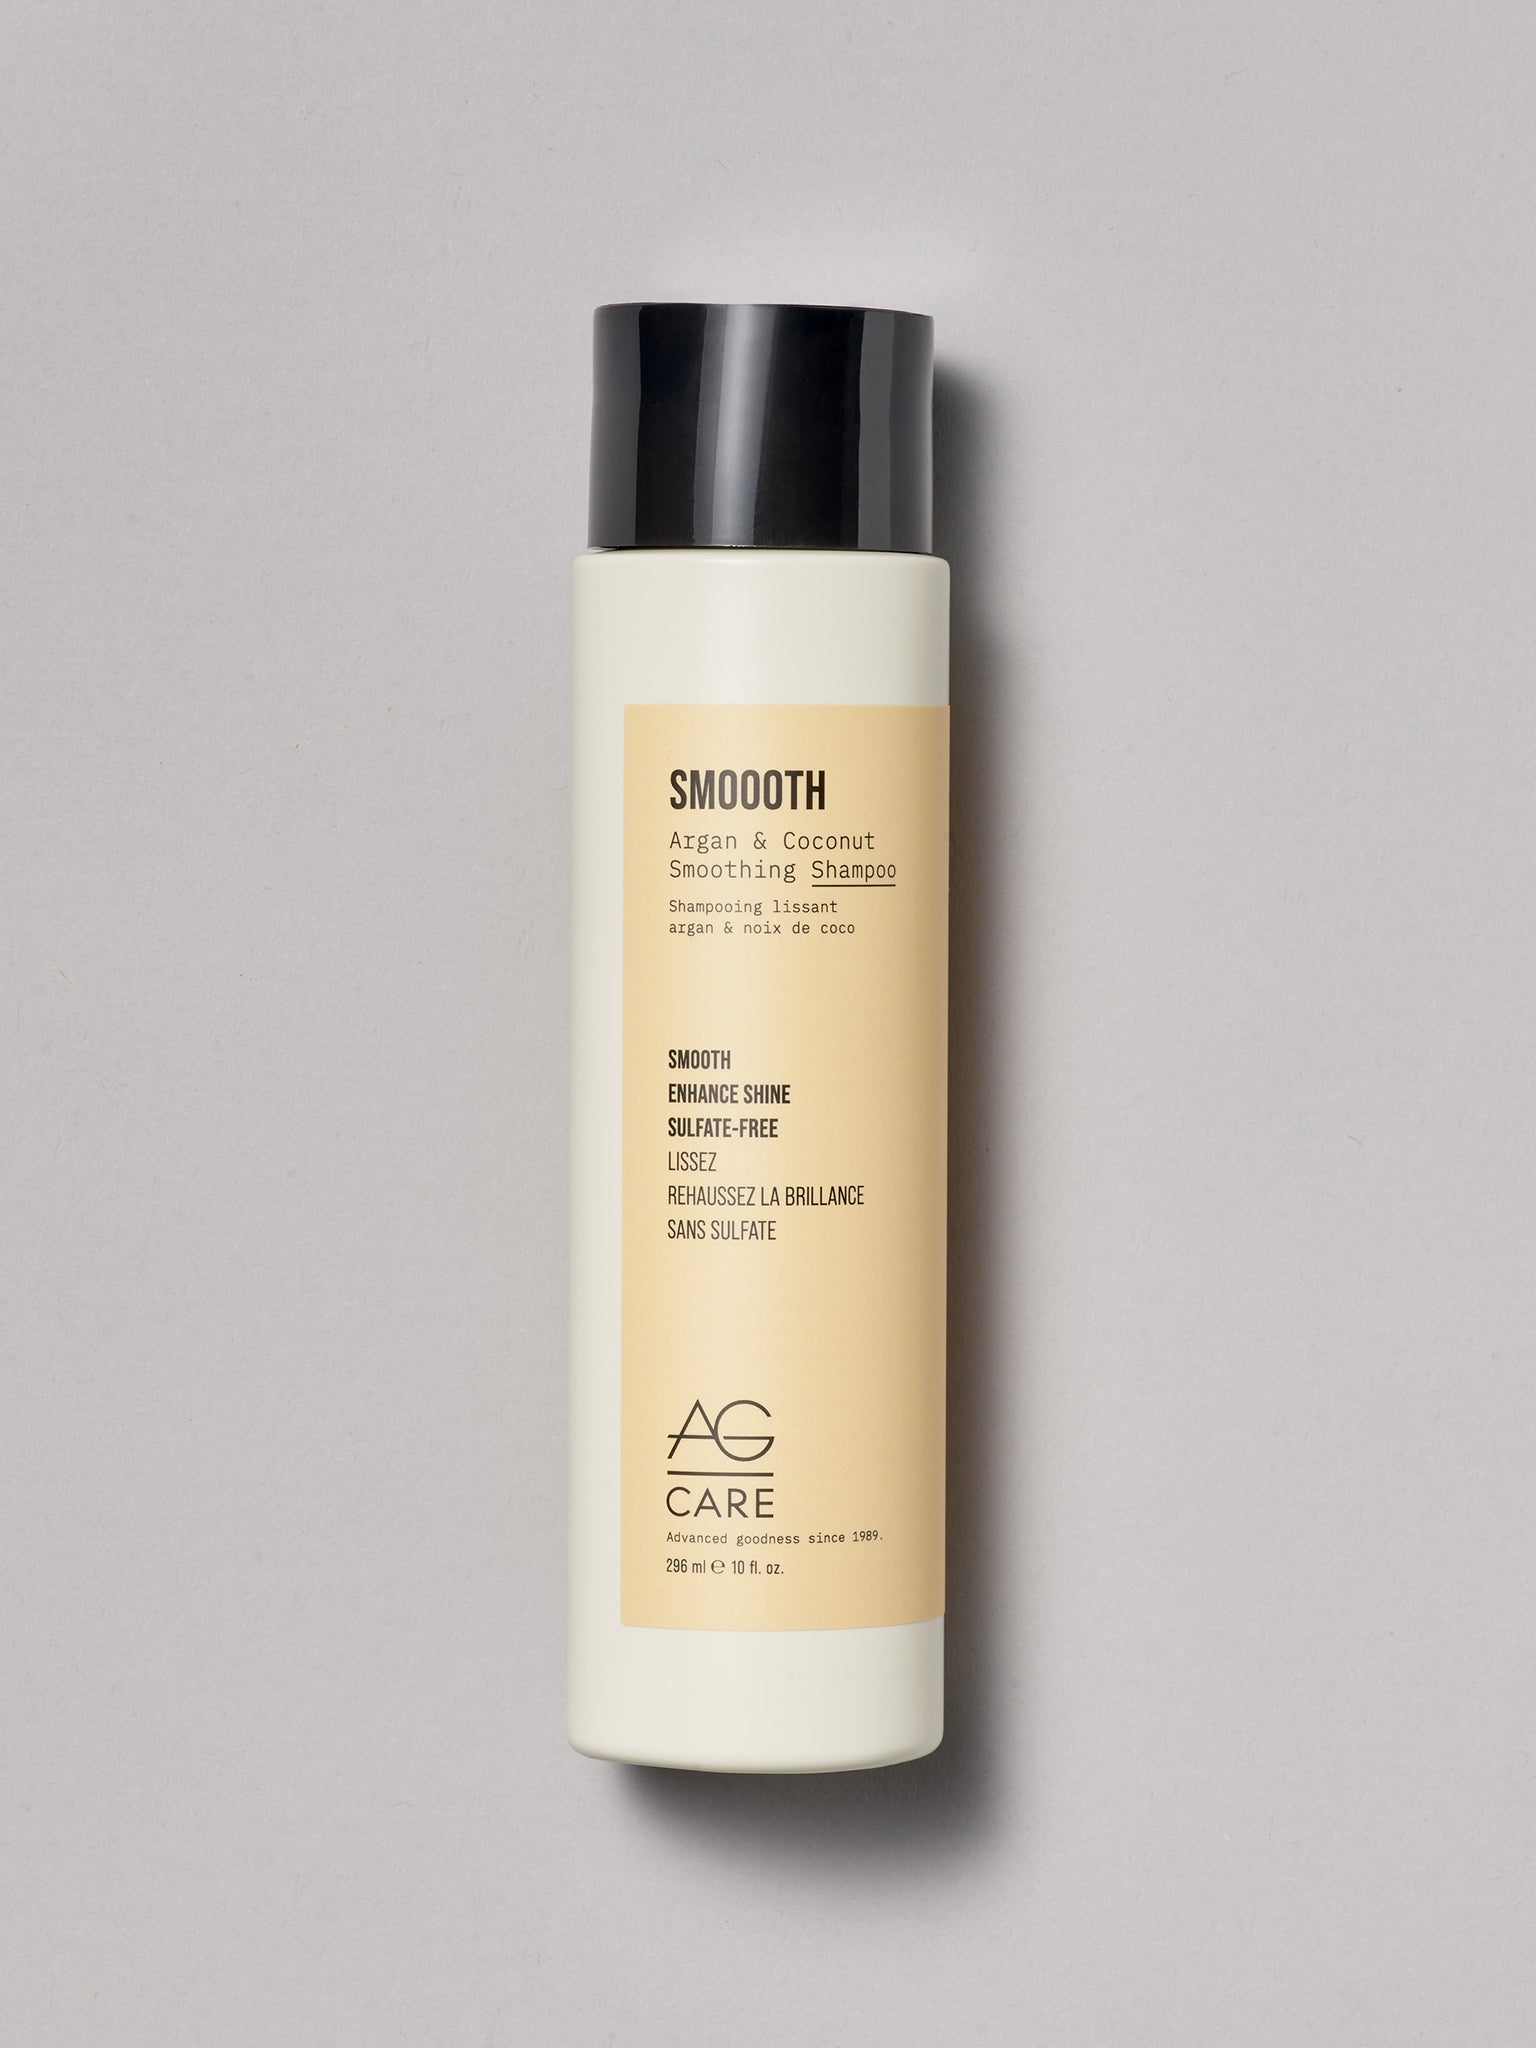 AG SMOOOTH: & Coconut Smoothing Shampoo – AG Care